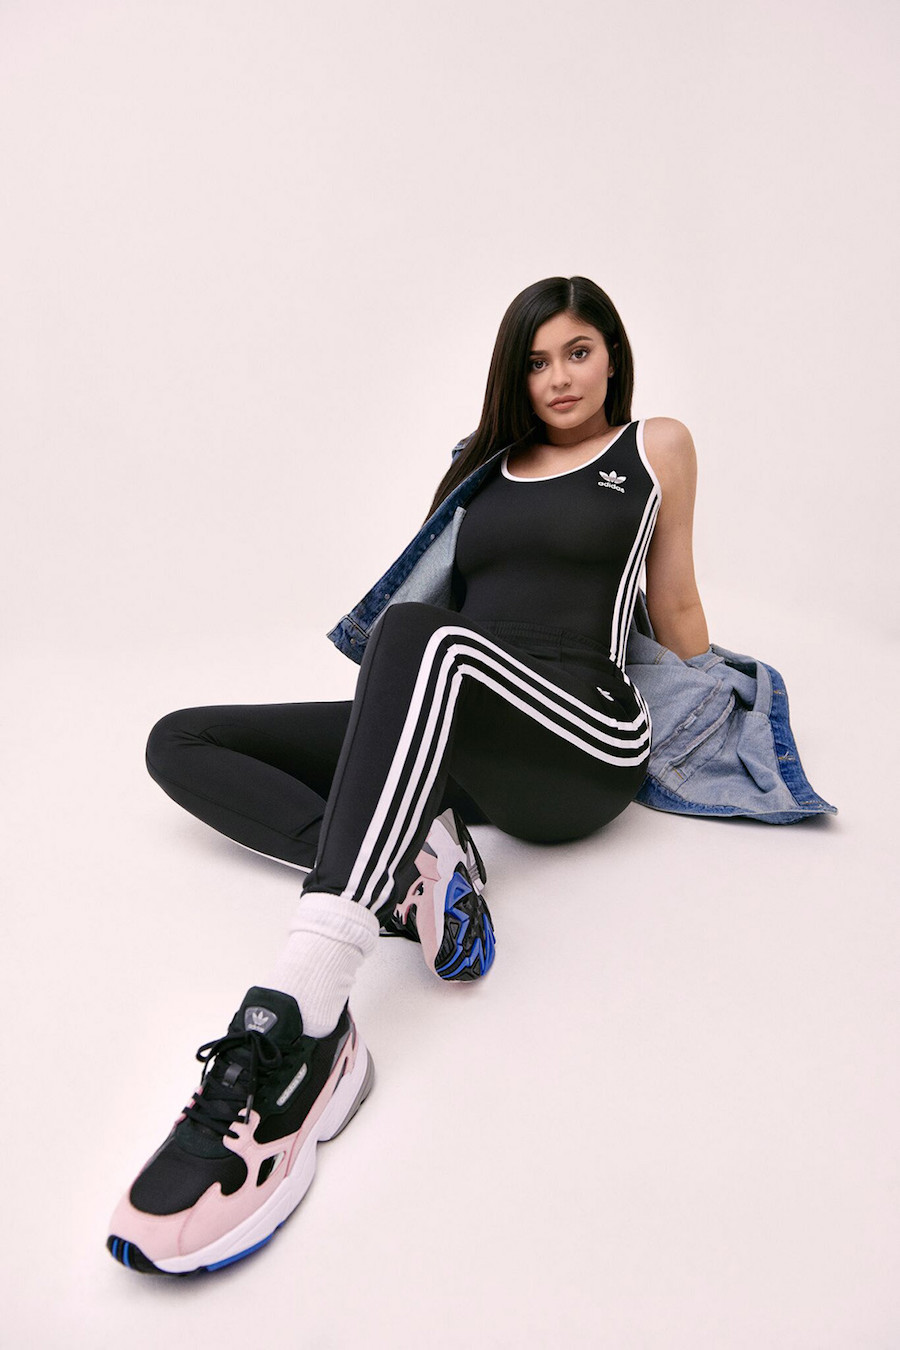 Kylie Jenner adidas Falcon Black Pink B28126 Release Date